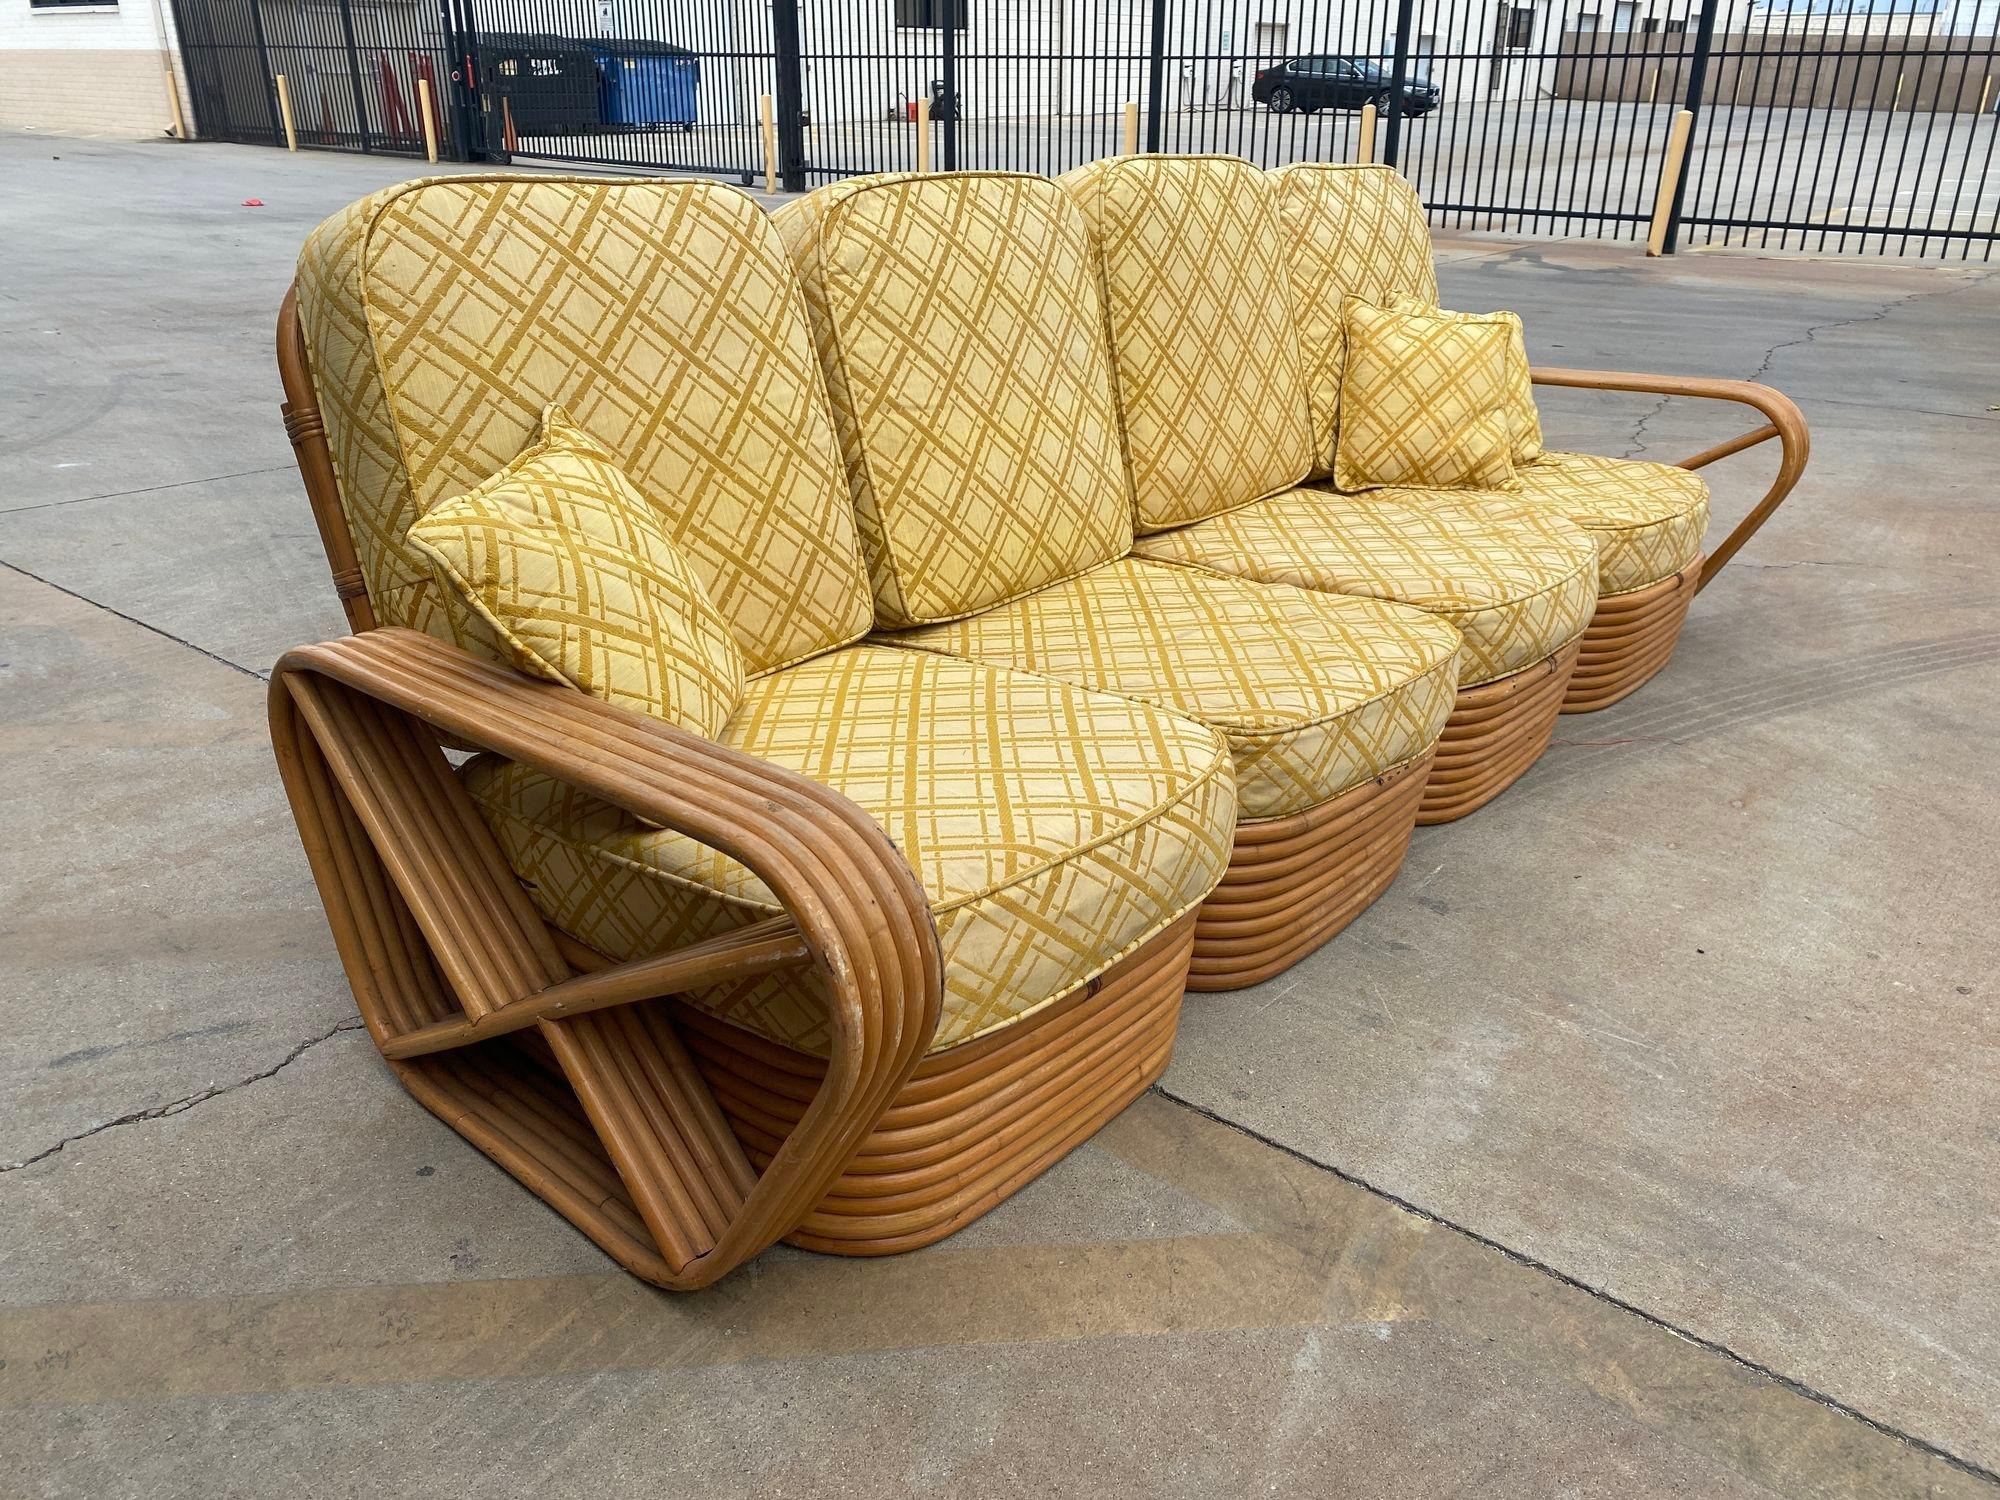 Restored 5-Strand Square Pretzel Rattan Chair & Sofa Livingroom Set In Excellent Condition For Sale In Van Nuys, CA